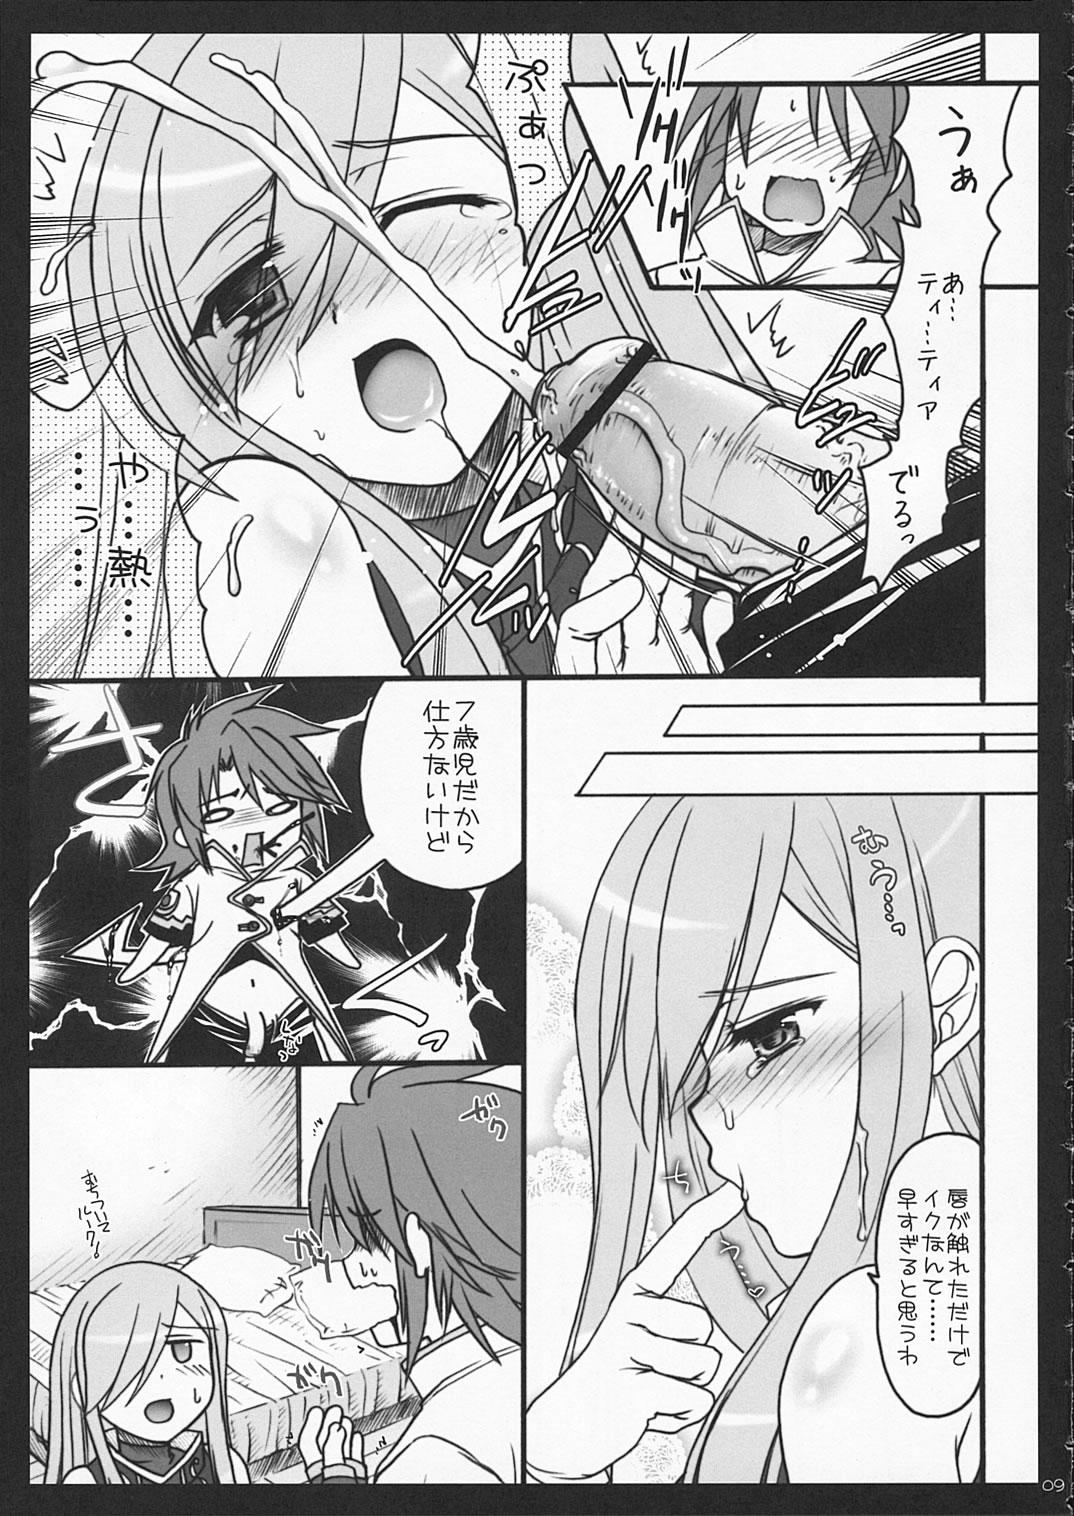 Peituda DEKAMELON - Tales of the abyss Gay Pawnshop - Page 8